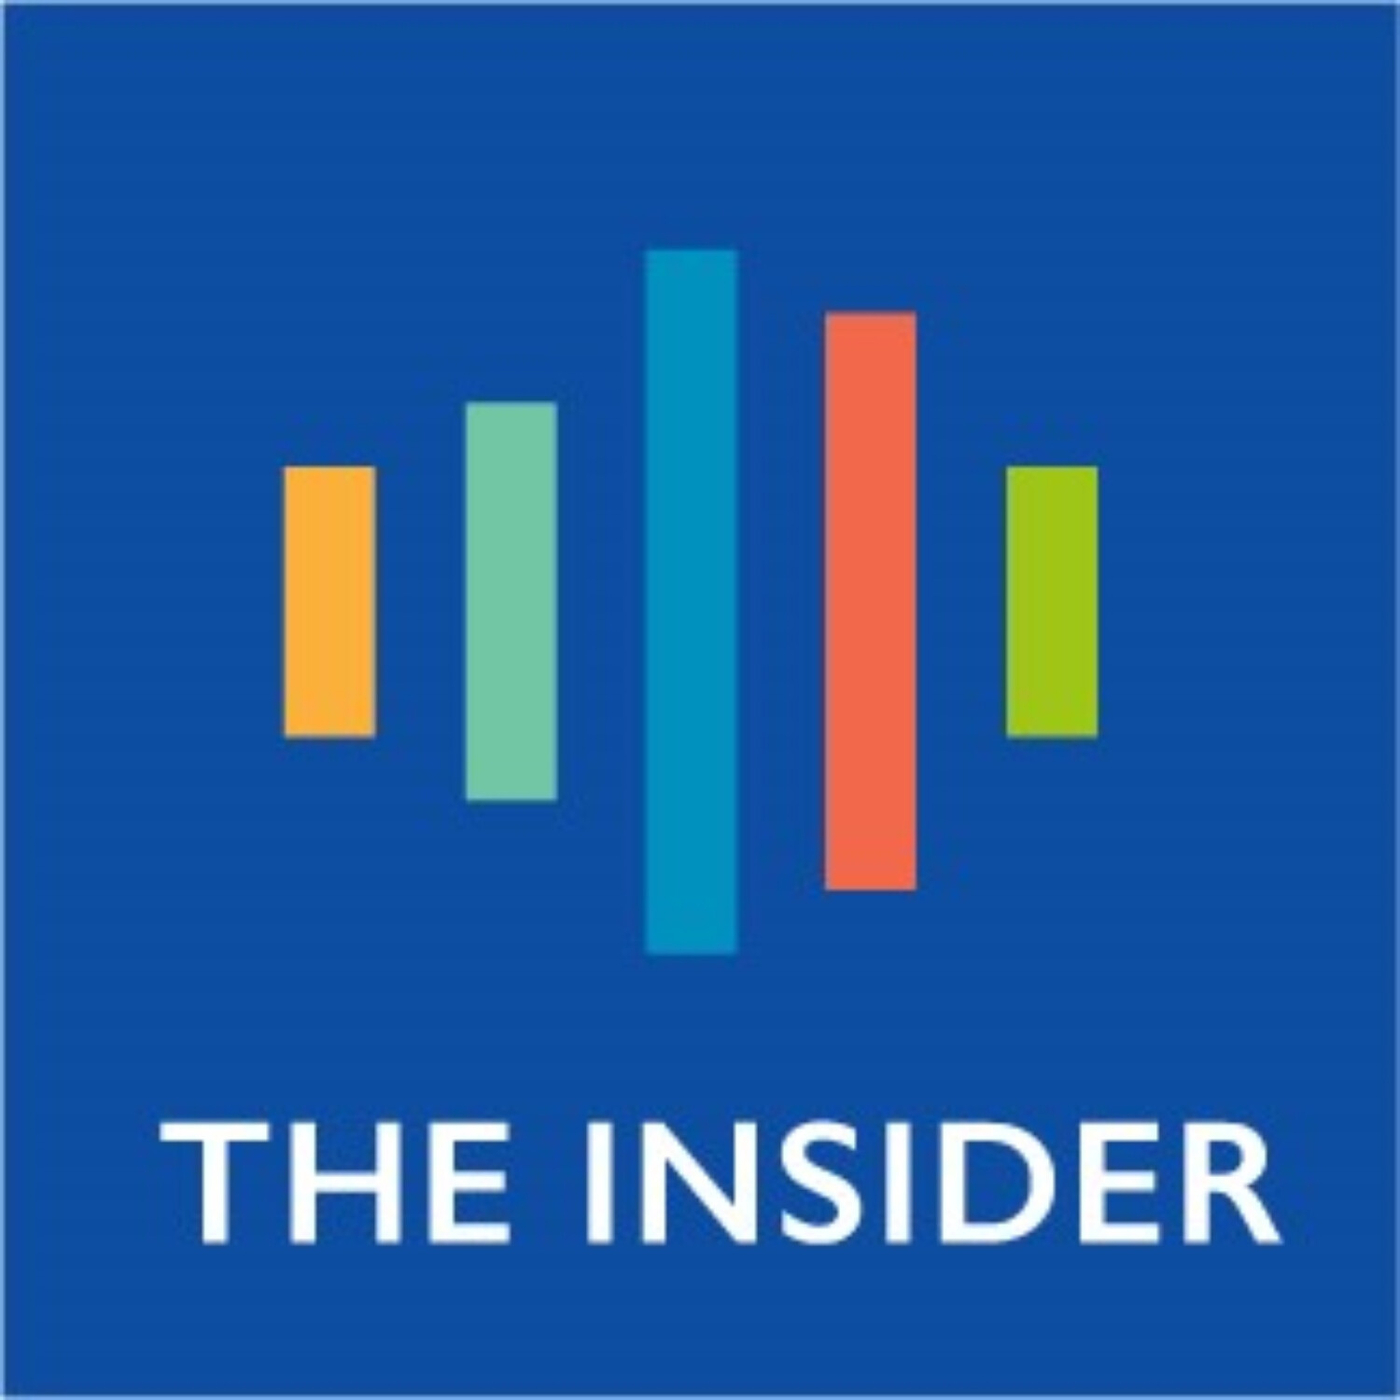 Deep Tech: Driving the Green Transition - Carbon Capture with Christophe Beuttler (Climeworks) - The Insider - Podcast.co